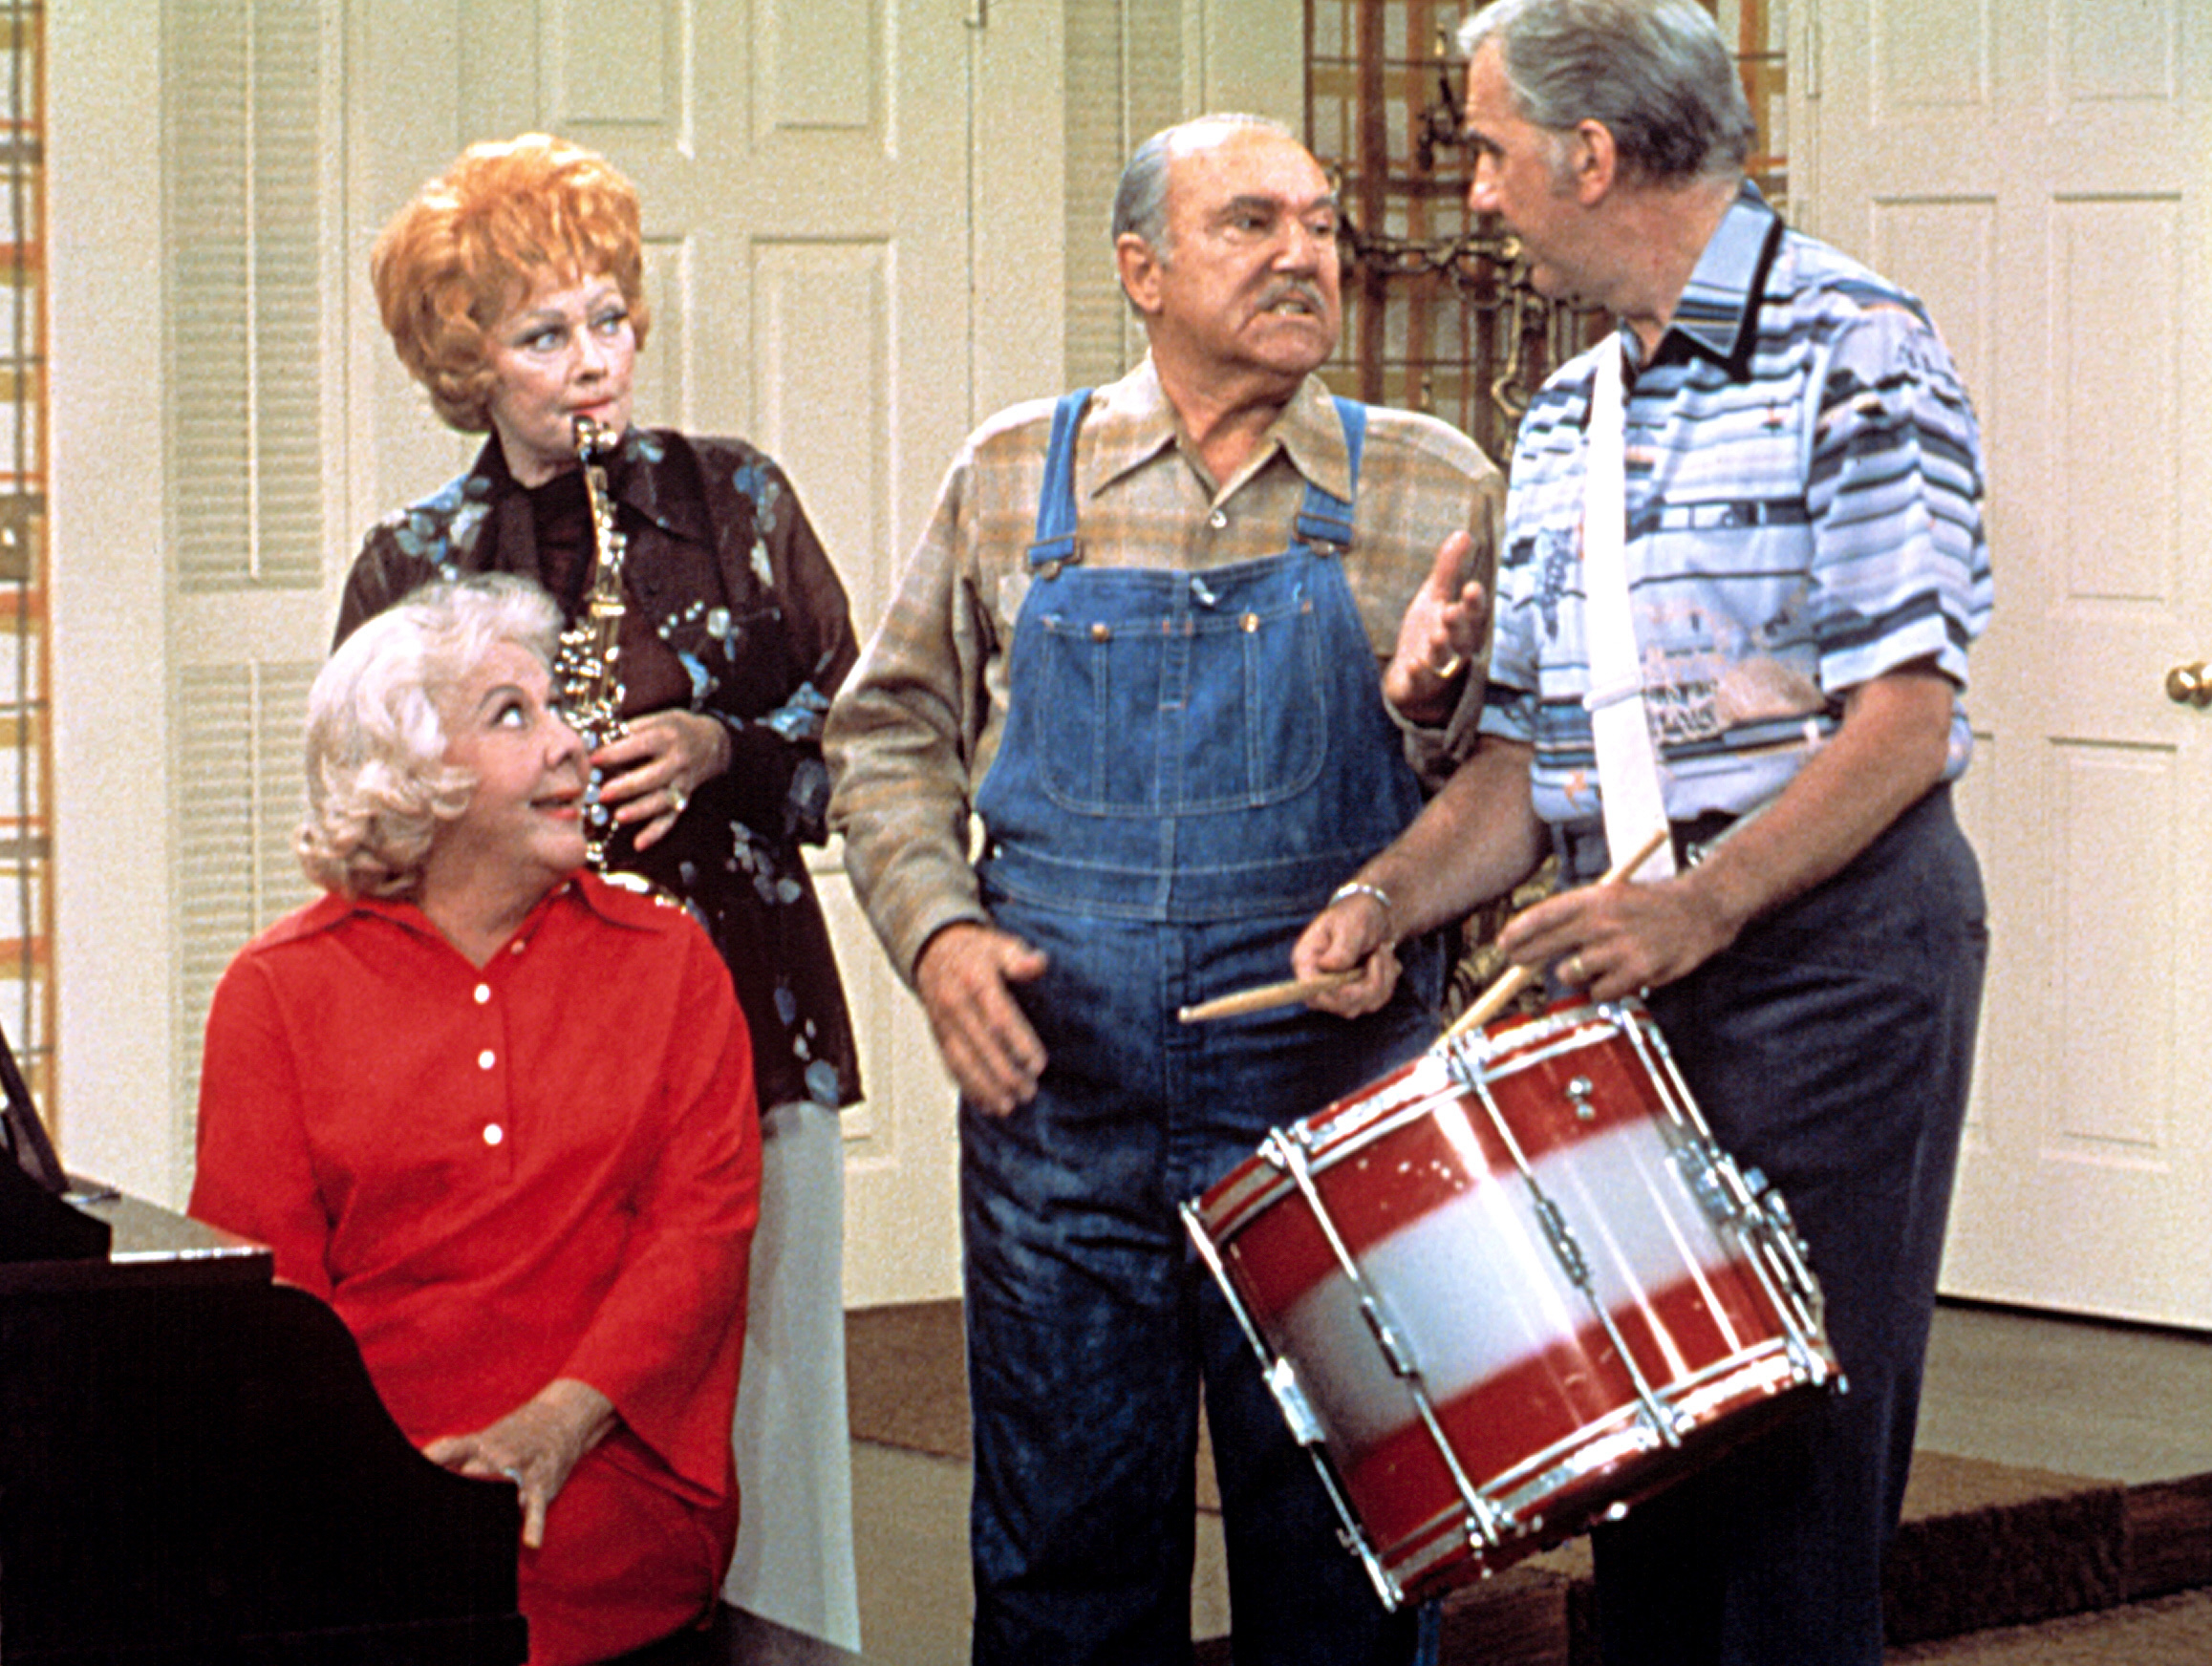 Lucille Ball plays the clarinet, Gale Gordon wears overalls, Vivian Vance sits at the piano, and William Frawley holds a drum in a comedic scene from &quot;The Lucy Show.&quot;